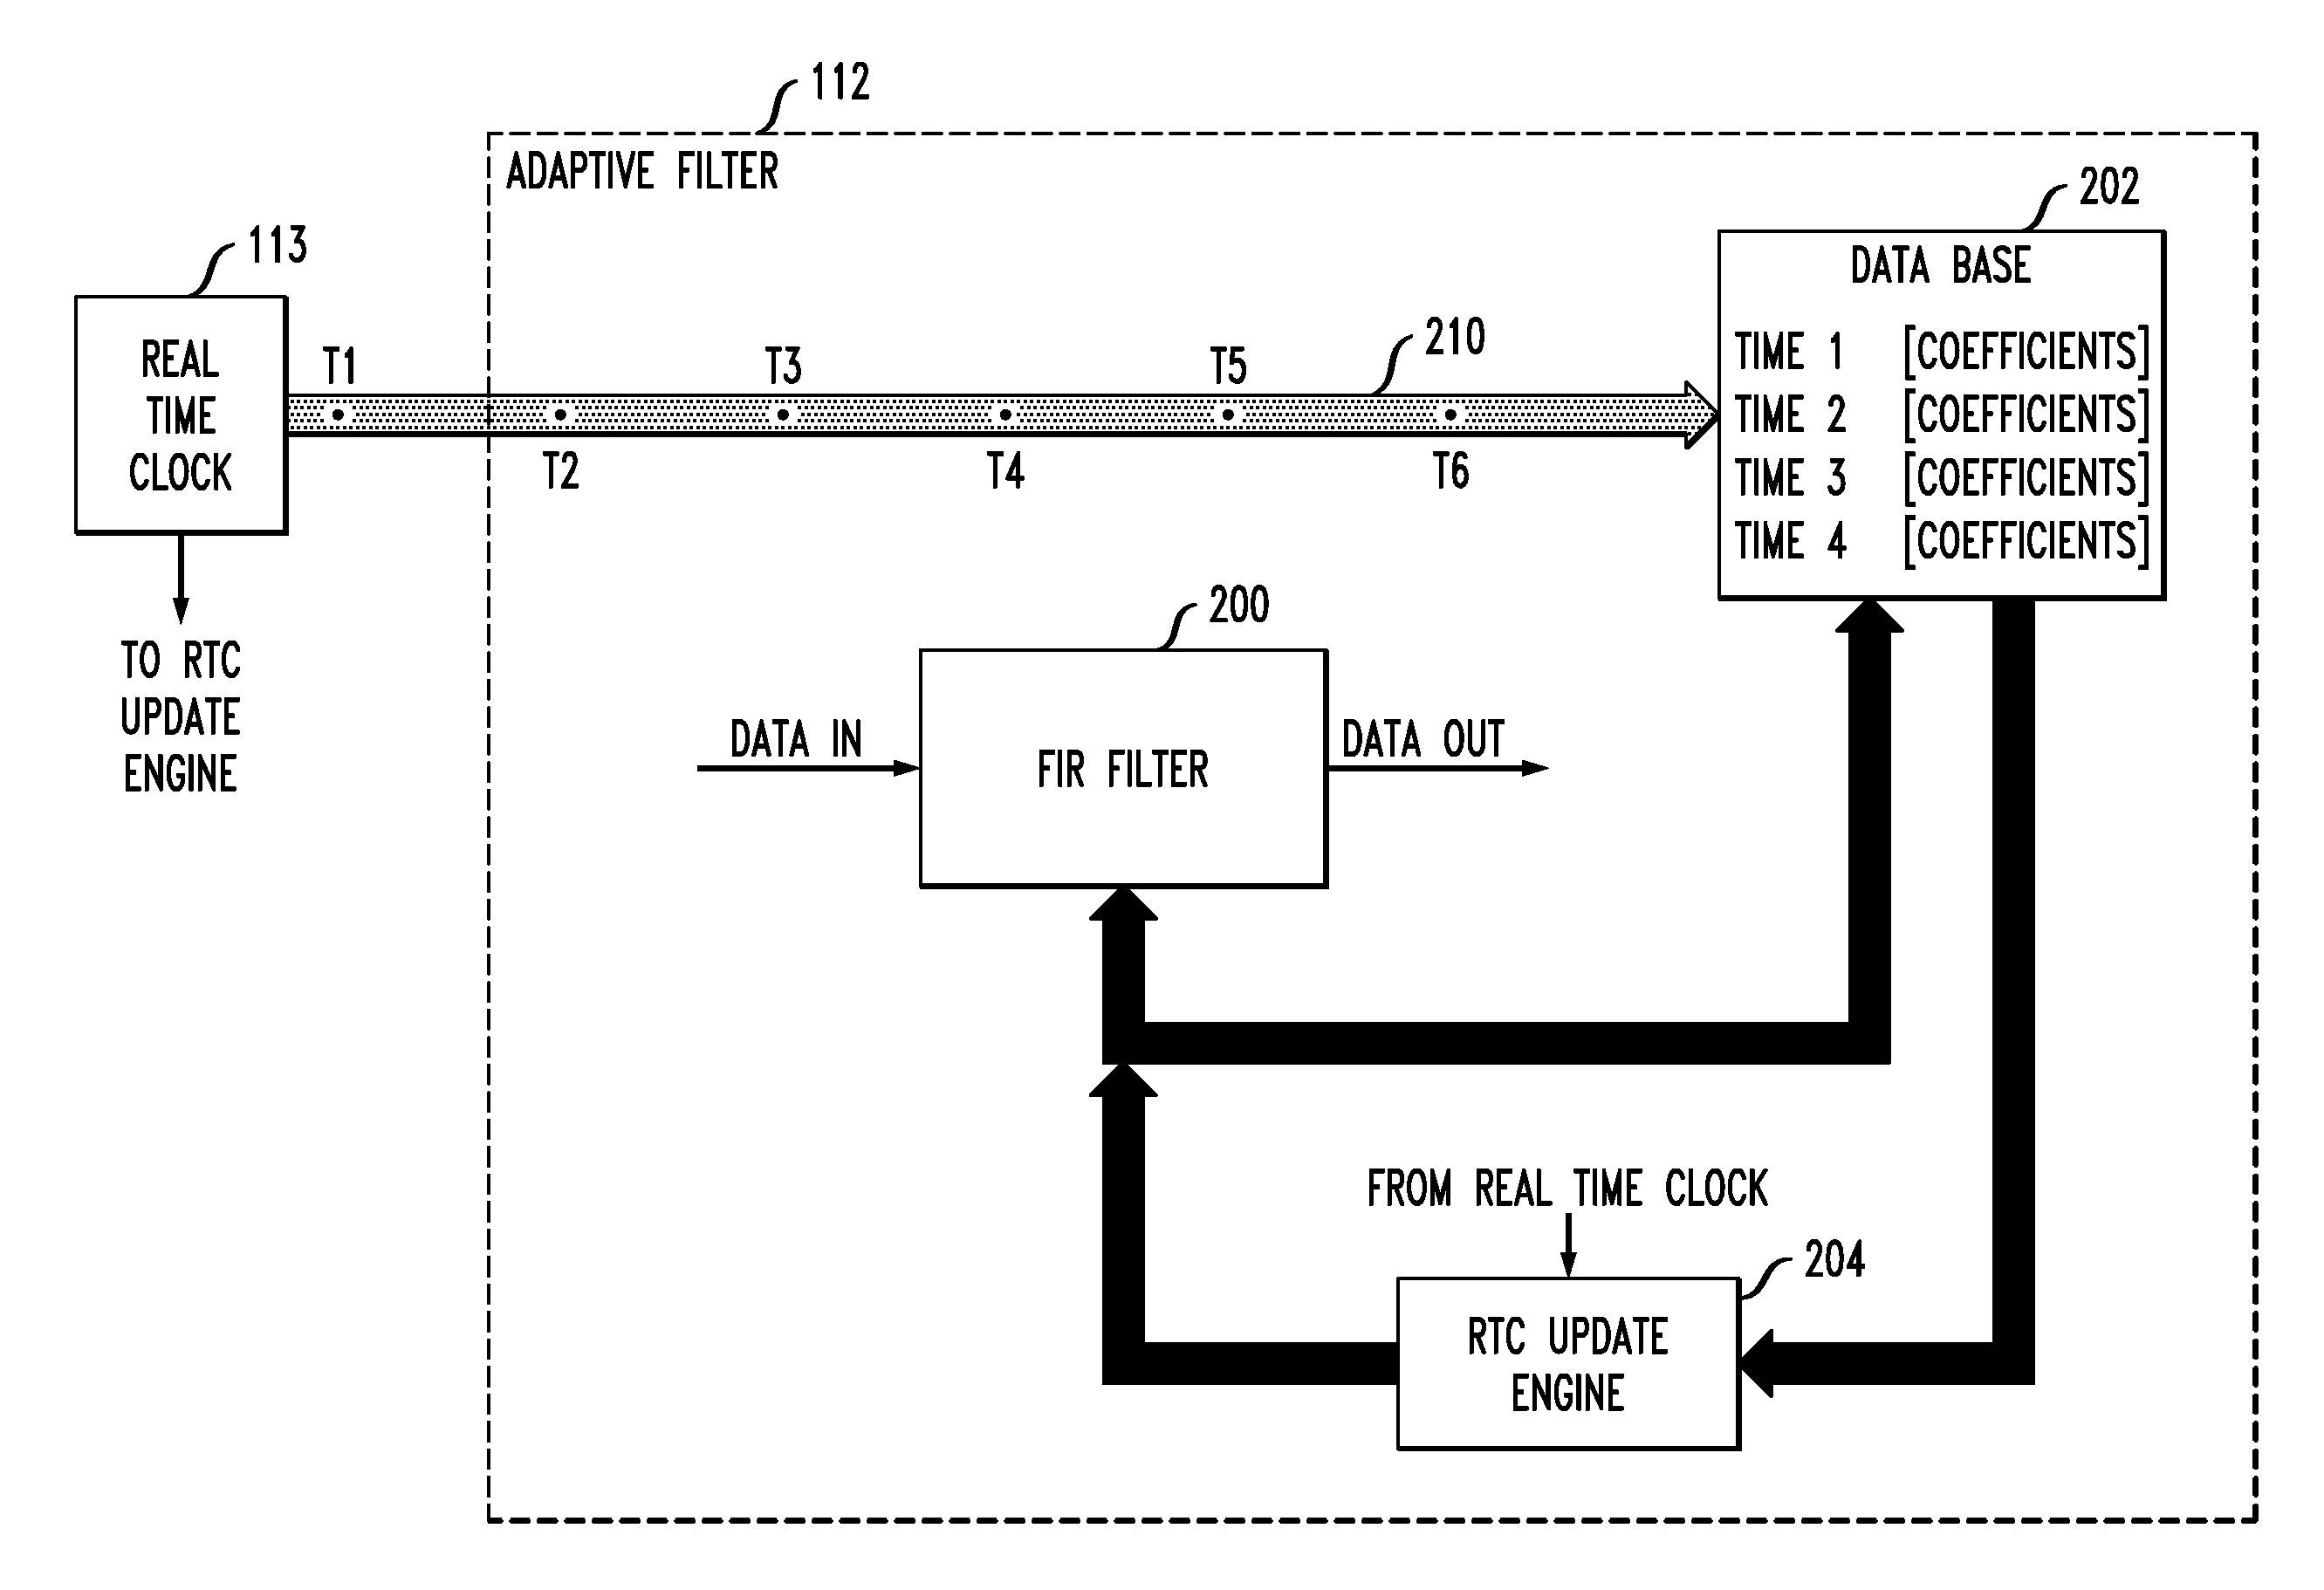 Adaptive filter with coefficient determination based on output of real time clock